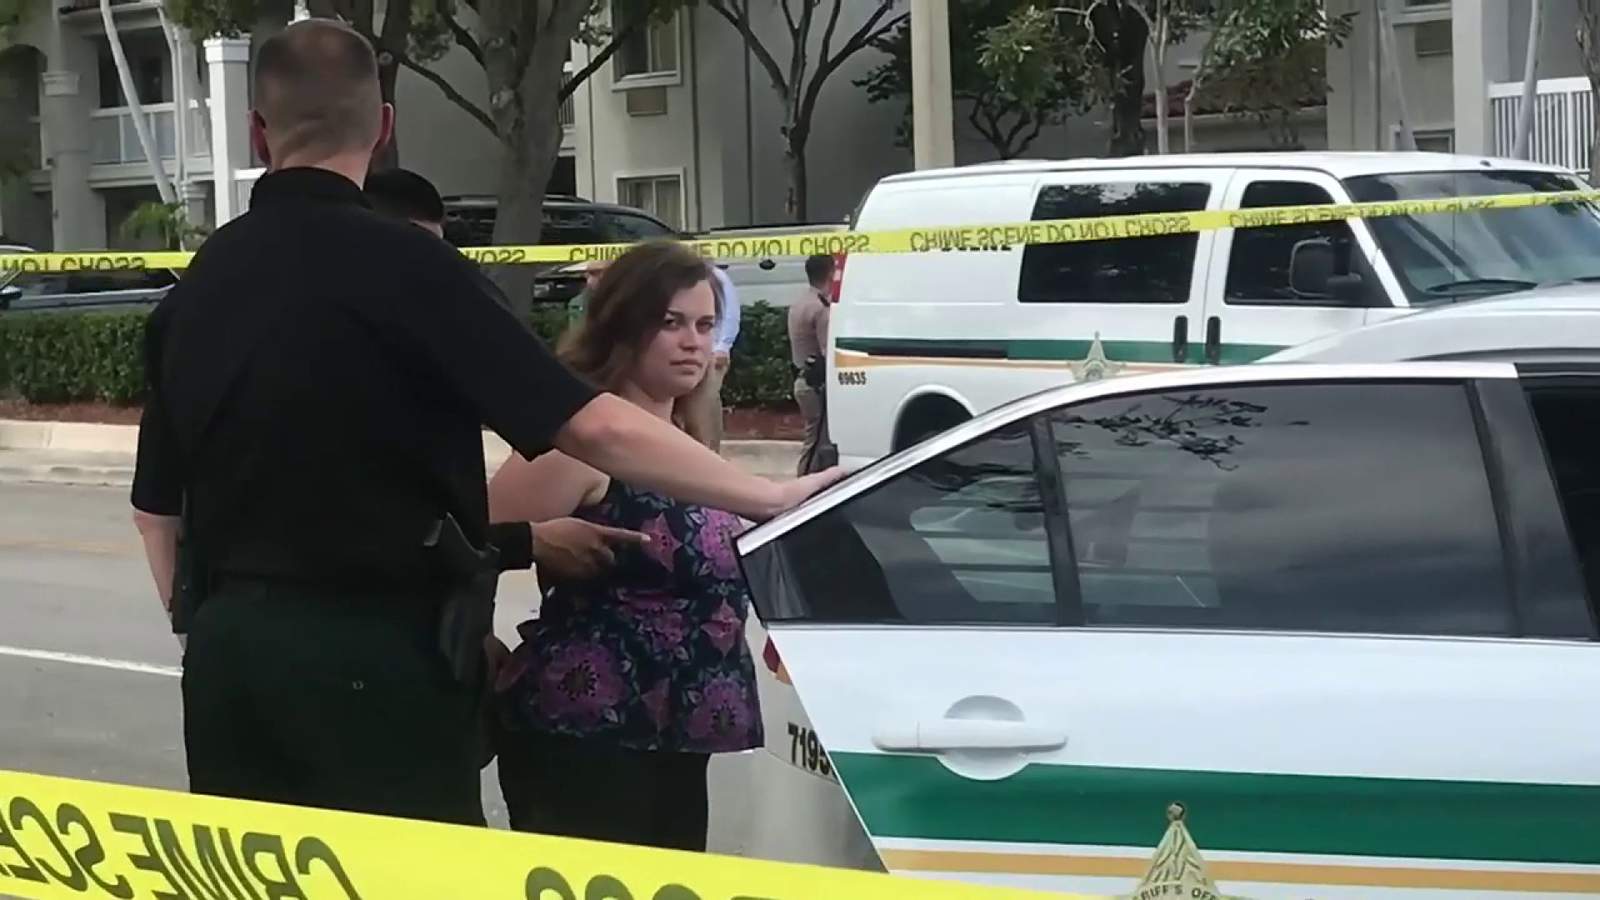 ‘Impaired’ opera singer faces charges after driving through Mar-a-Lago checkpoints